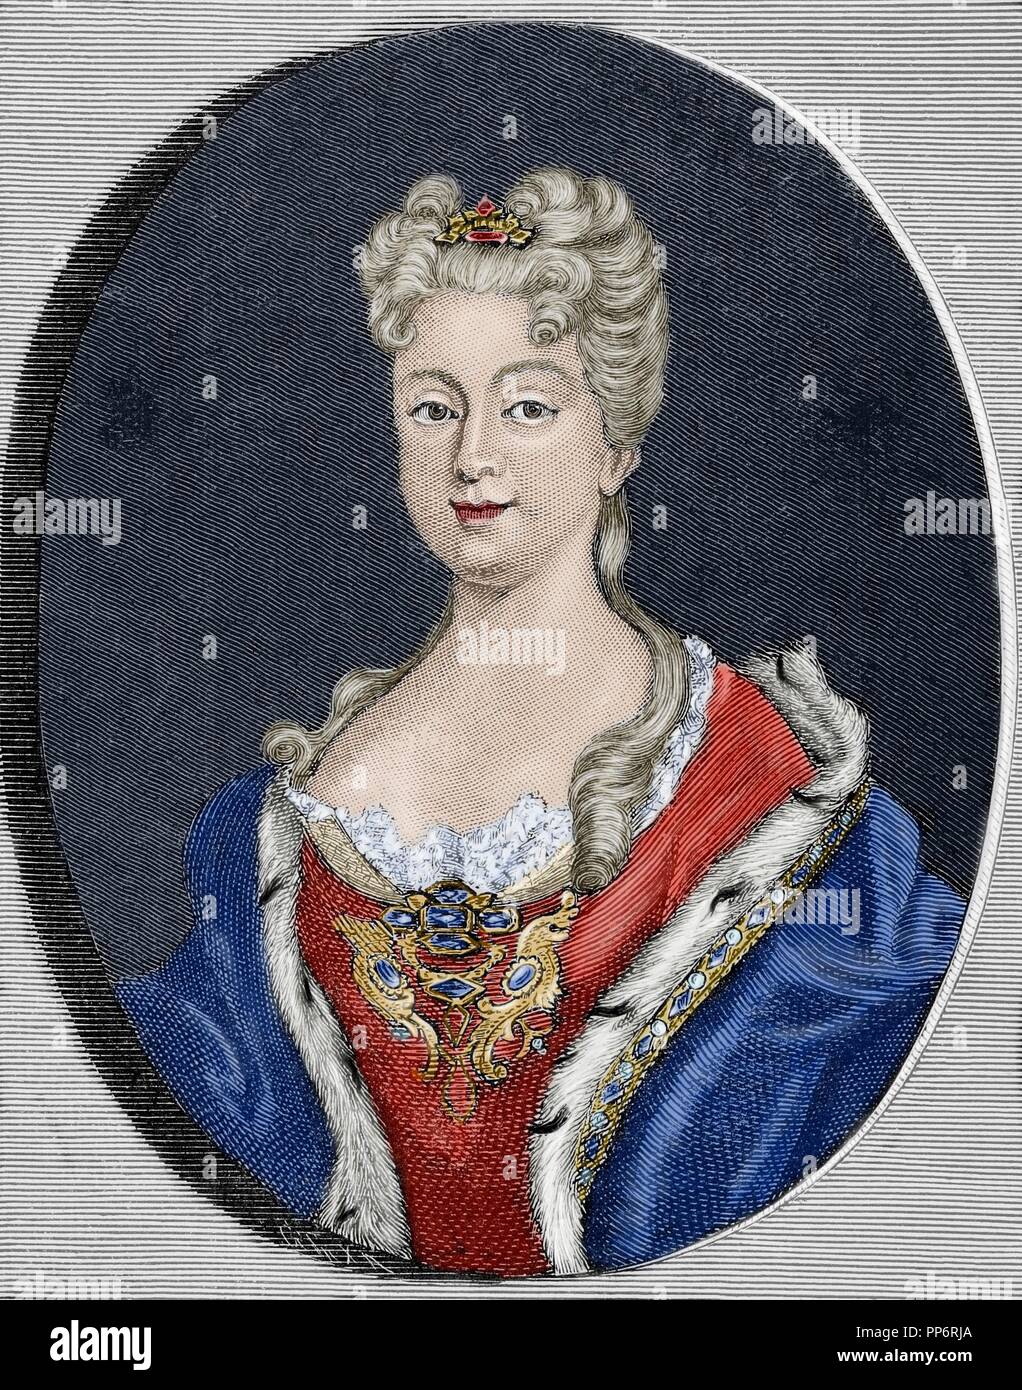 Elisabeth Farnese (1692-1766). Queen consort of Spain, wife of Philip V. Colored engraving. Stock Photo